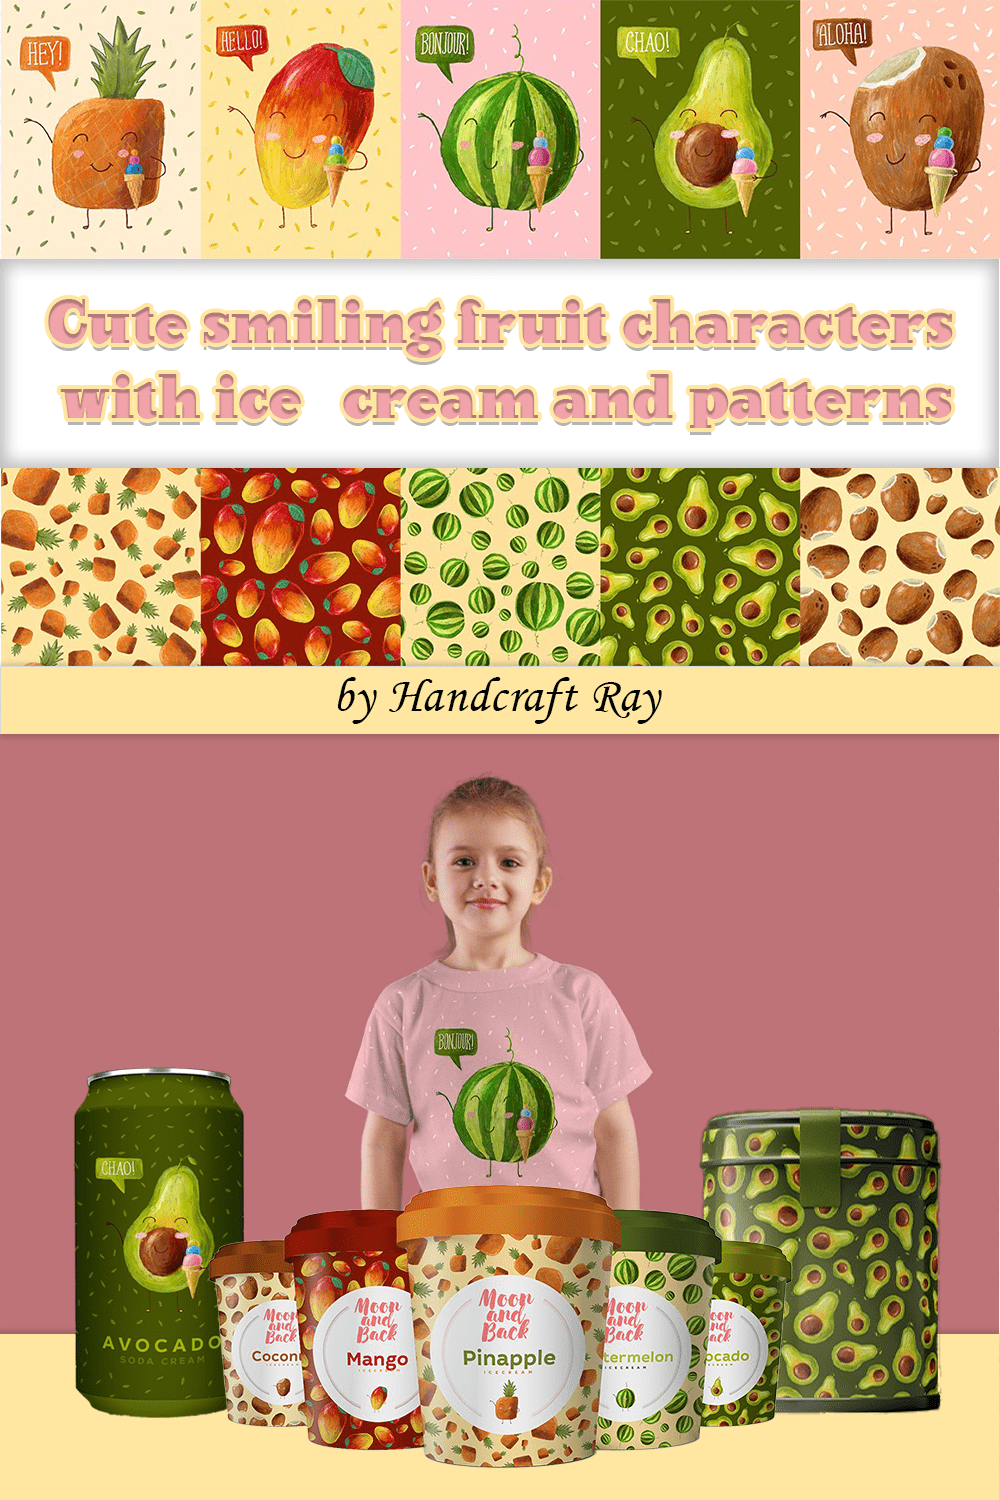 Cute smiling fruit characters with ice cream and patterns - pinterest image preview.